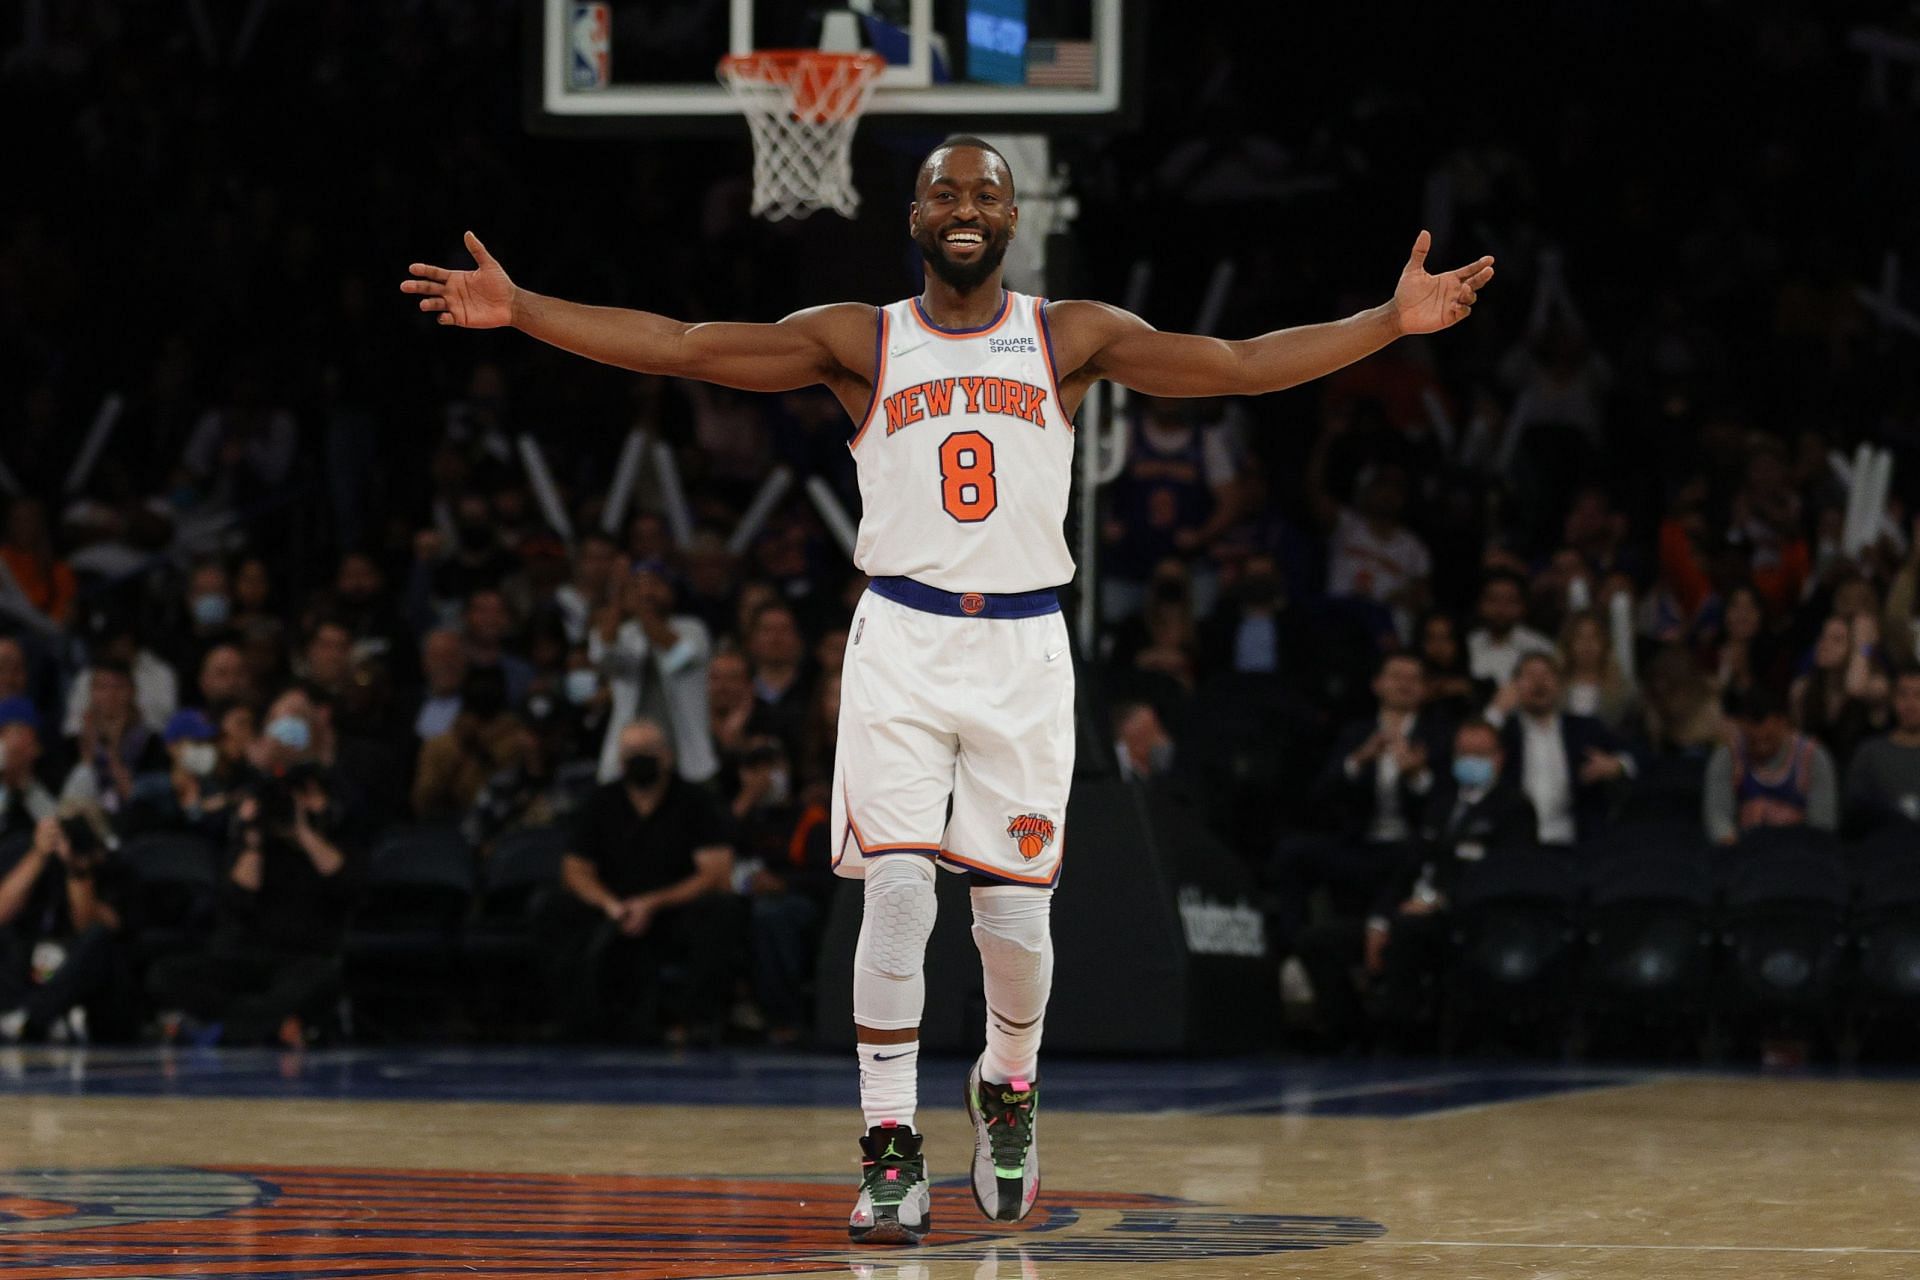 Kemba Walker and the New York Knicks are off to a 3-1 start to the new NBA season